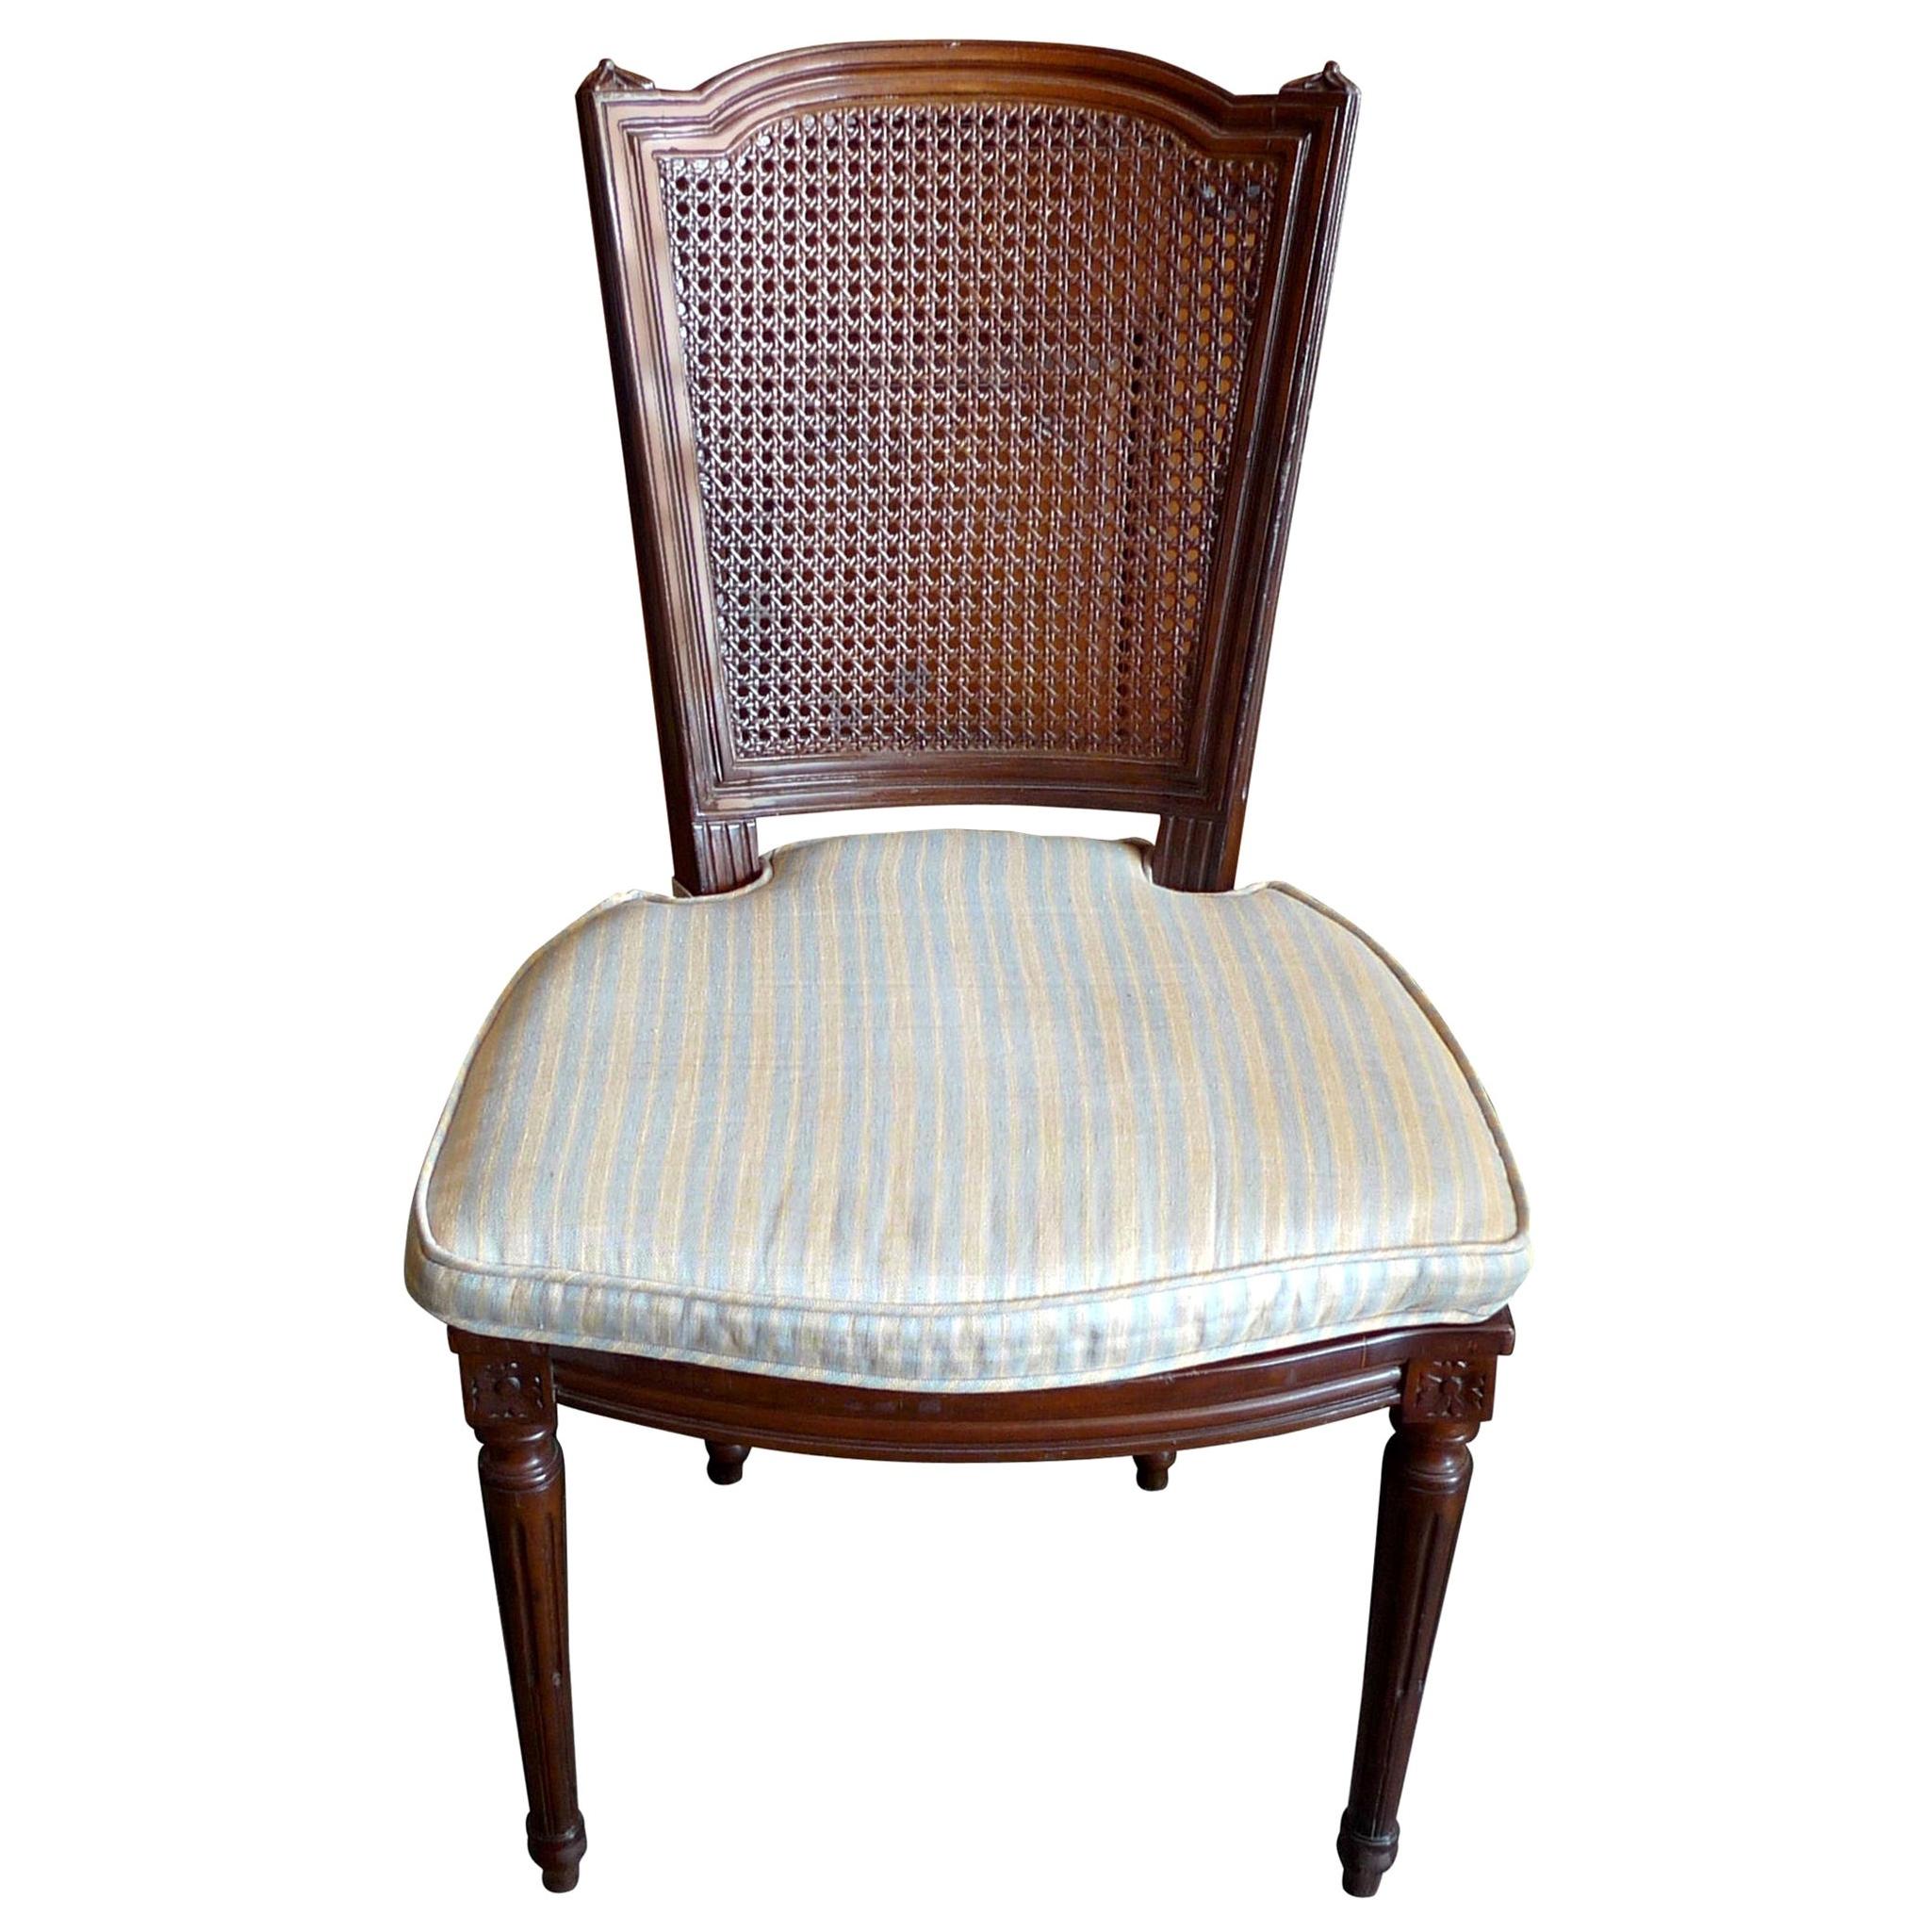 French 19th Century Rattan Stained Side Chair with Fitted Cushion